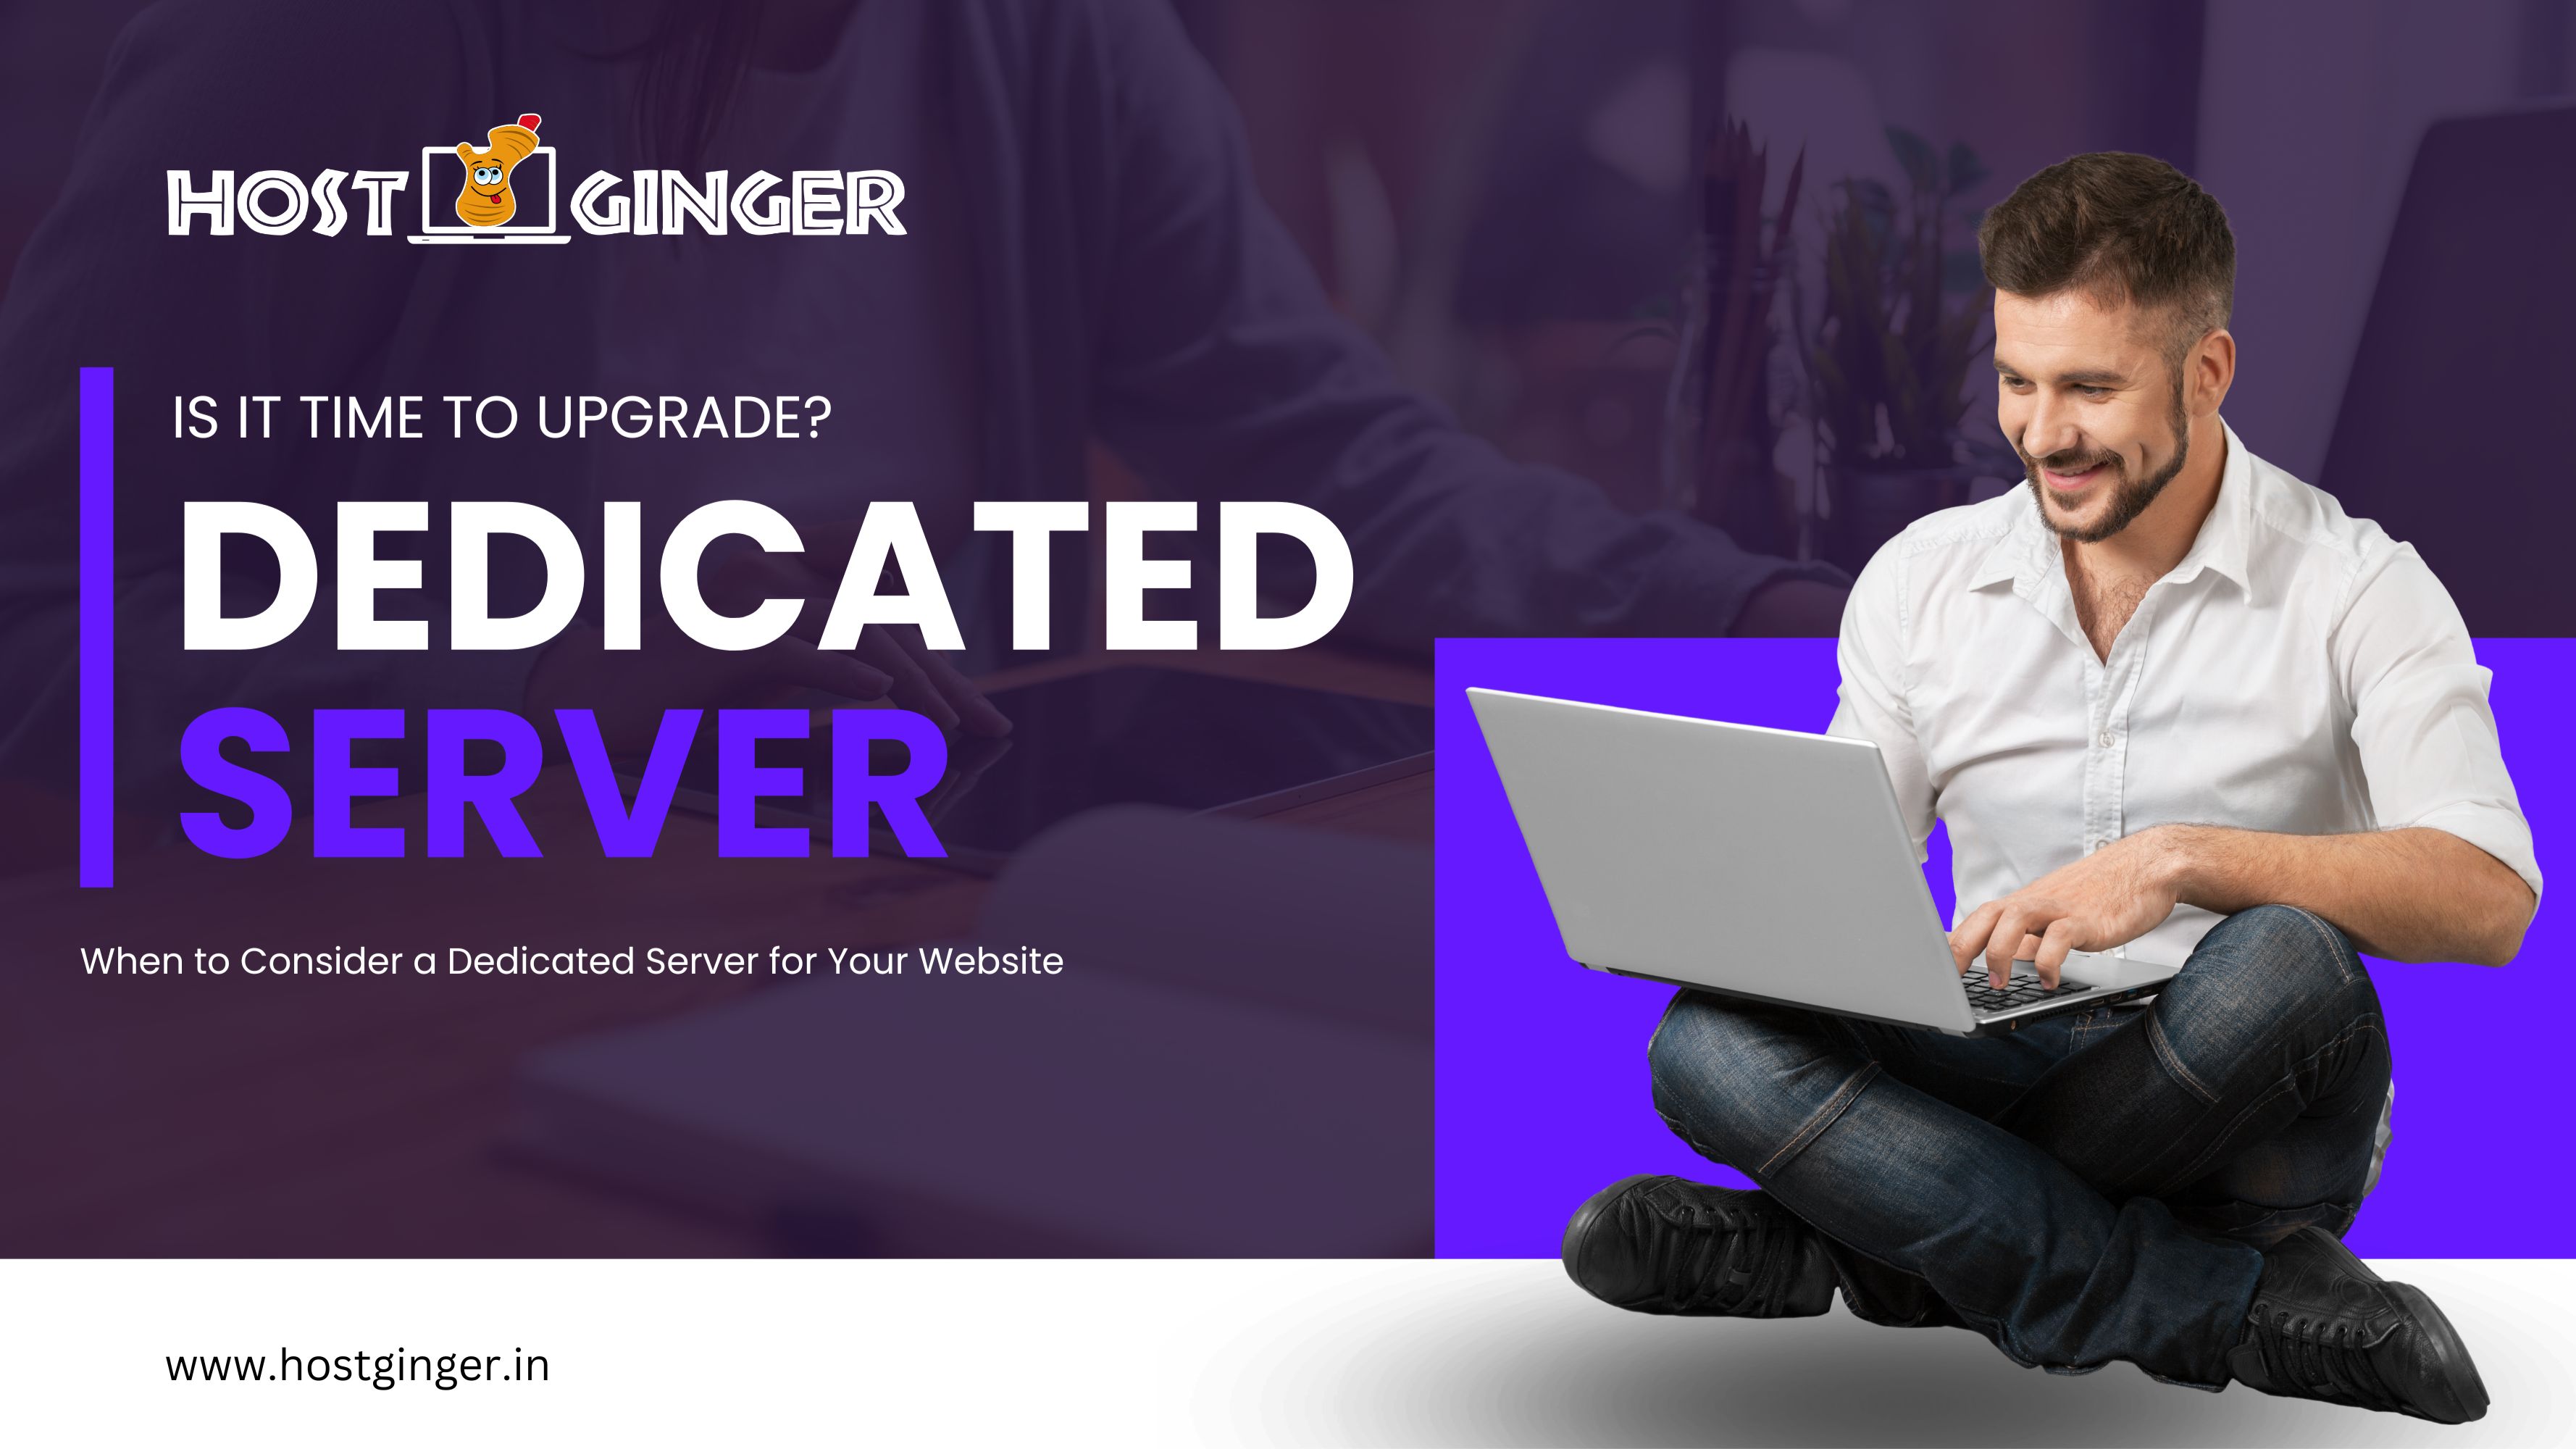 Dedicated Server for Your Website